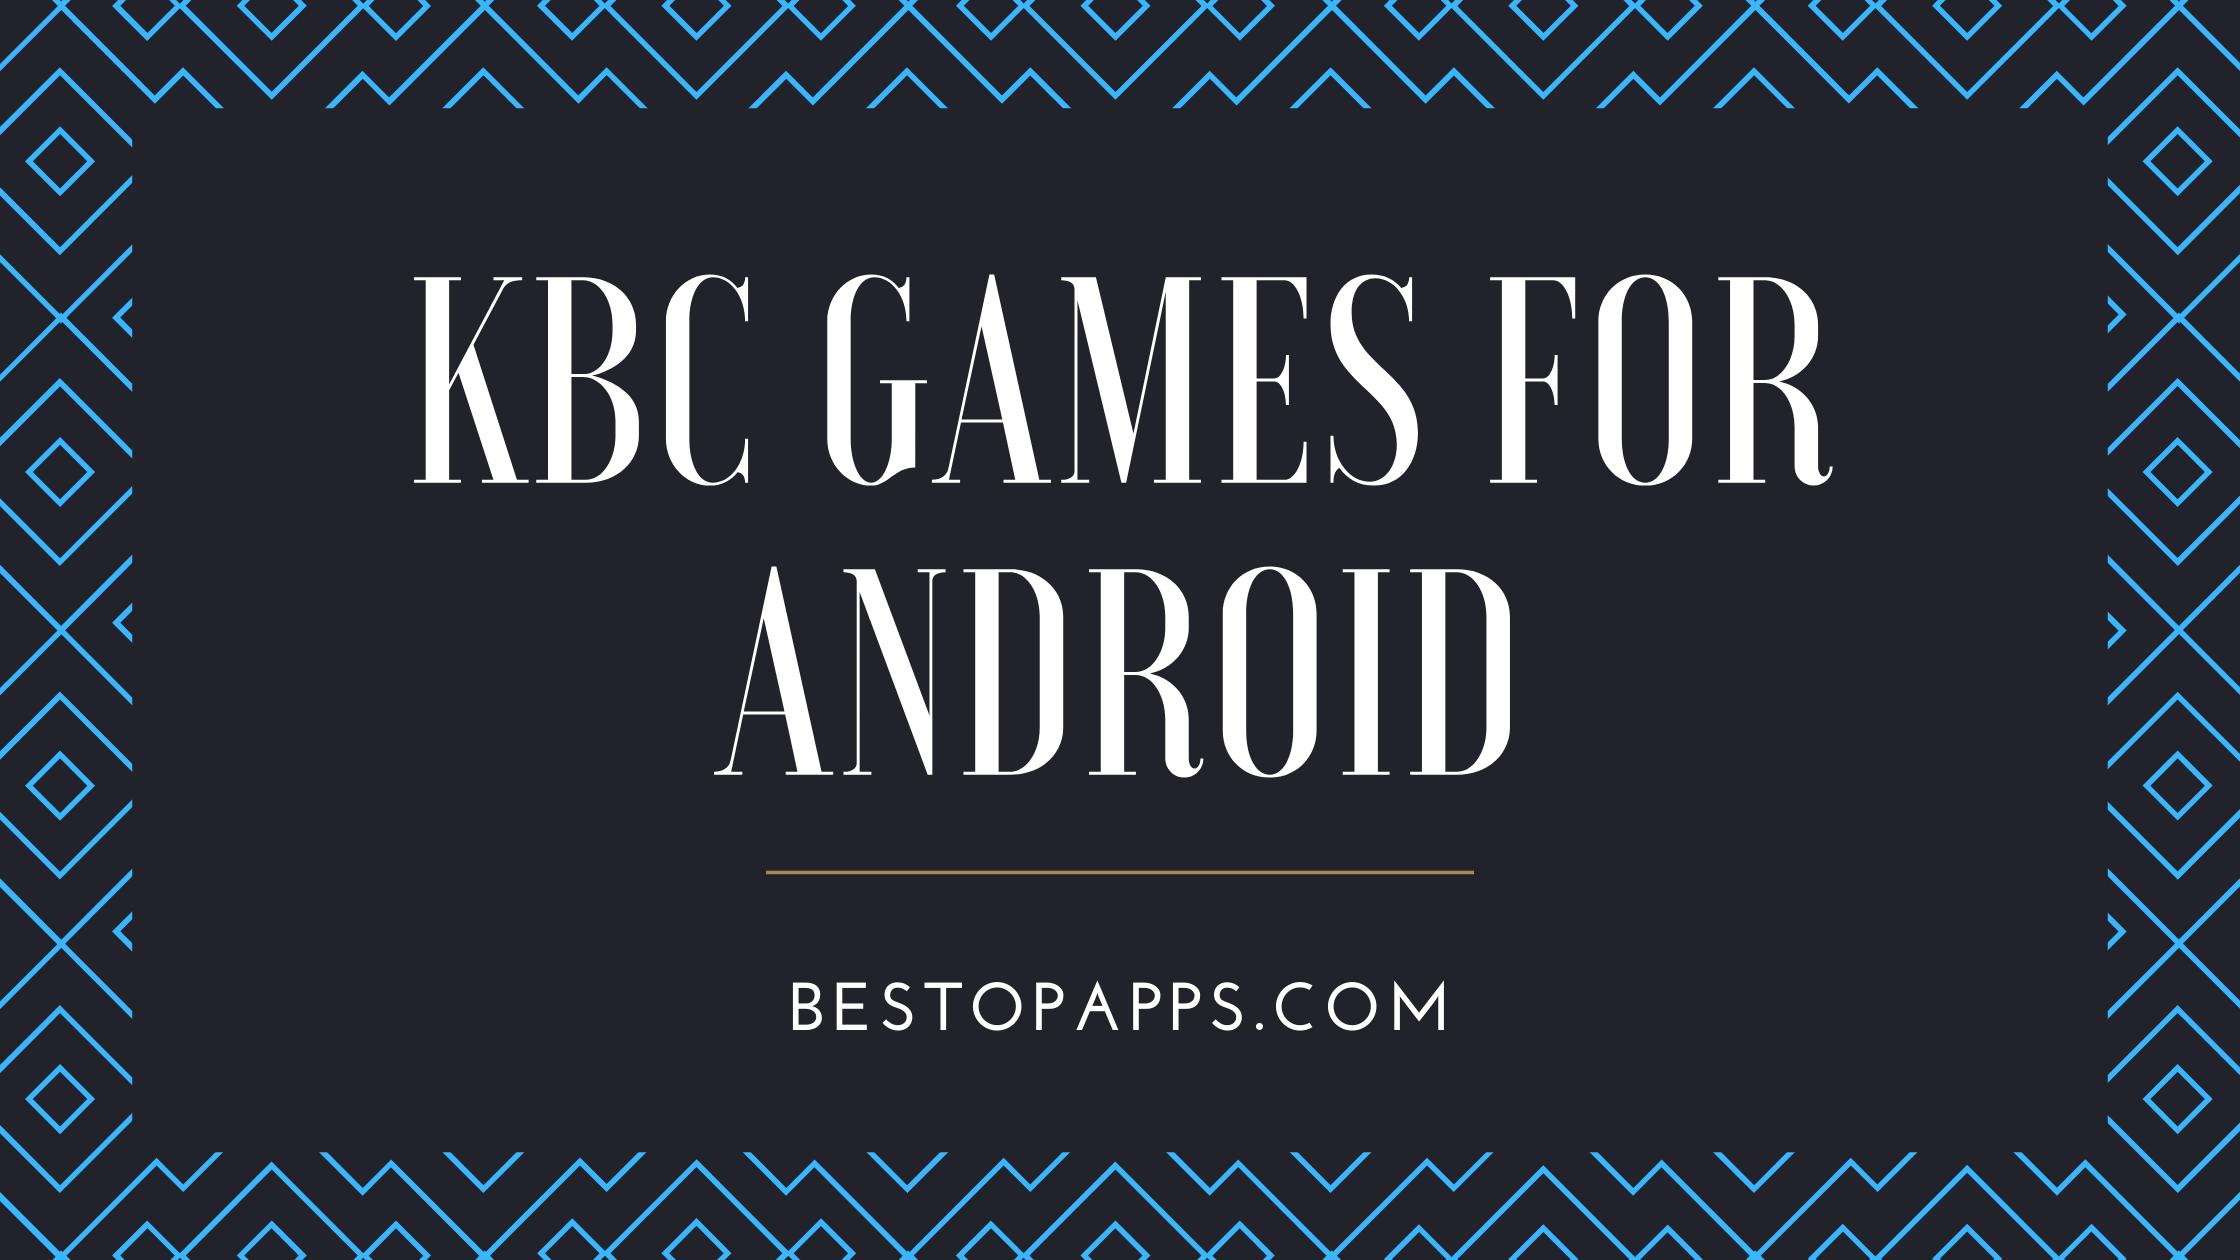 KBC Games for Android